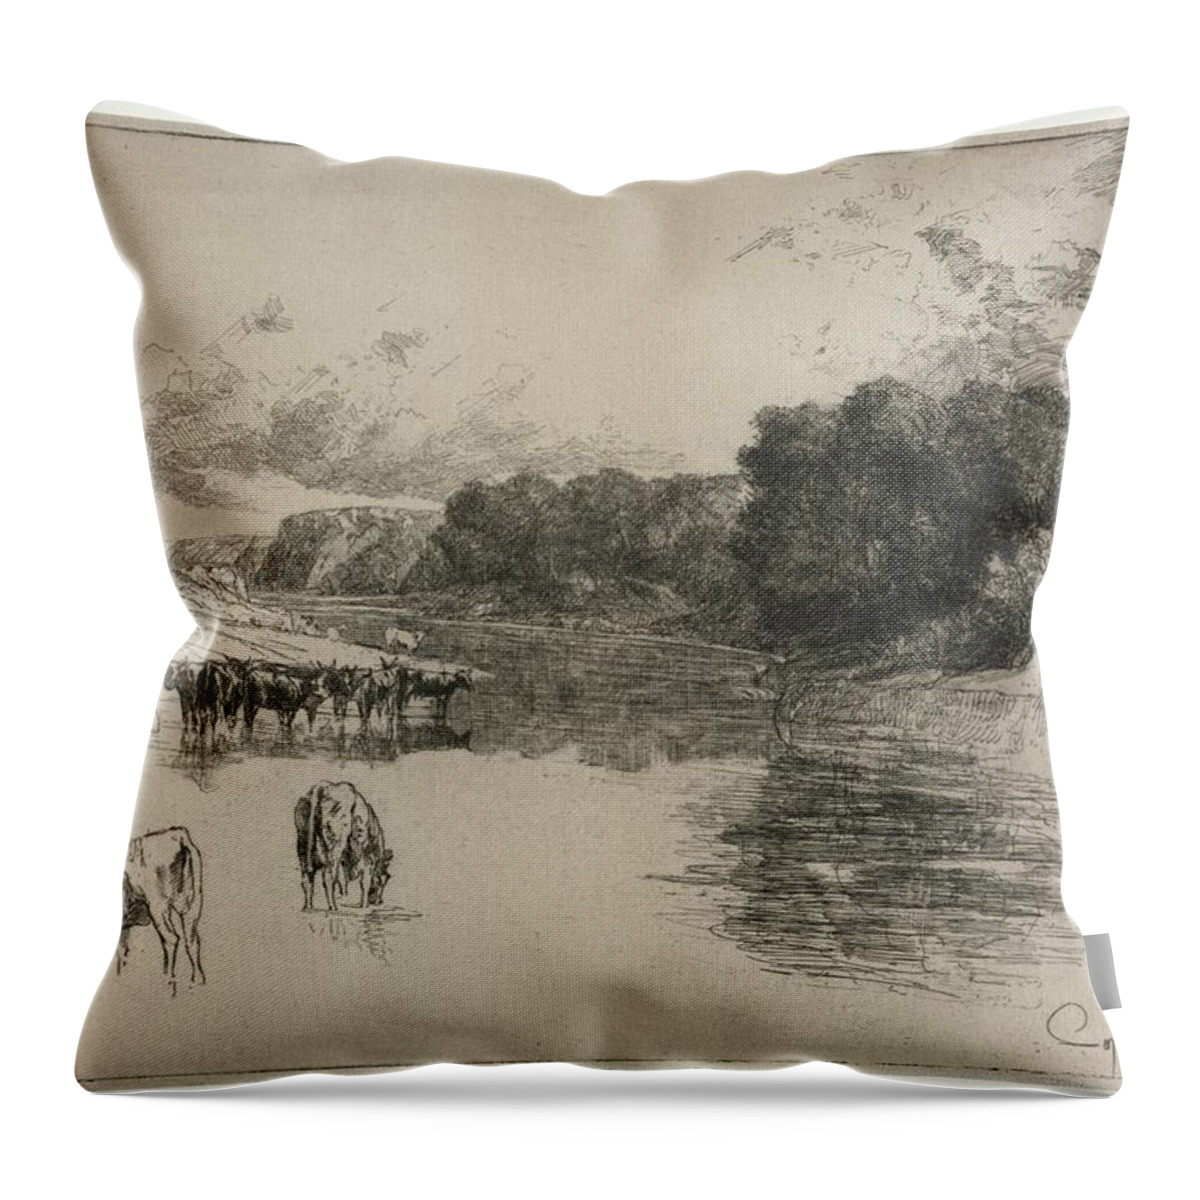 A Lancashire River 1881 Francis Seymour Haden British 1818 To 1910 Throw Pillow featuring the painting A Lancashire River 1881 Francis Seymour Haden British 1818 to 1910 by MotionAge Designs